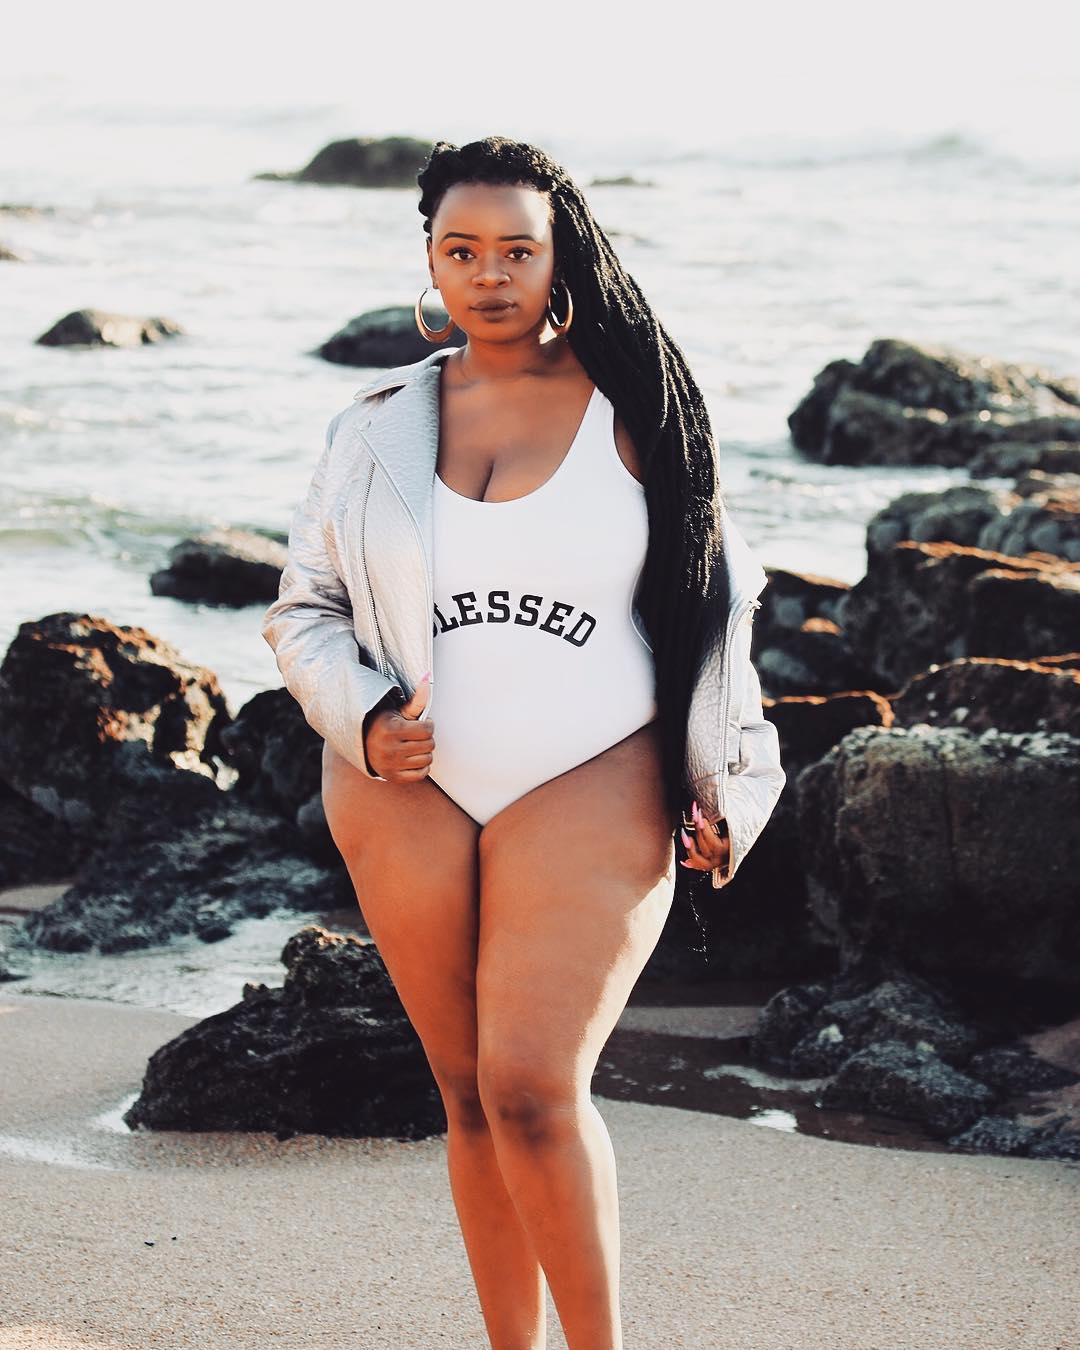 Thickleeyonce